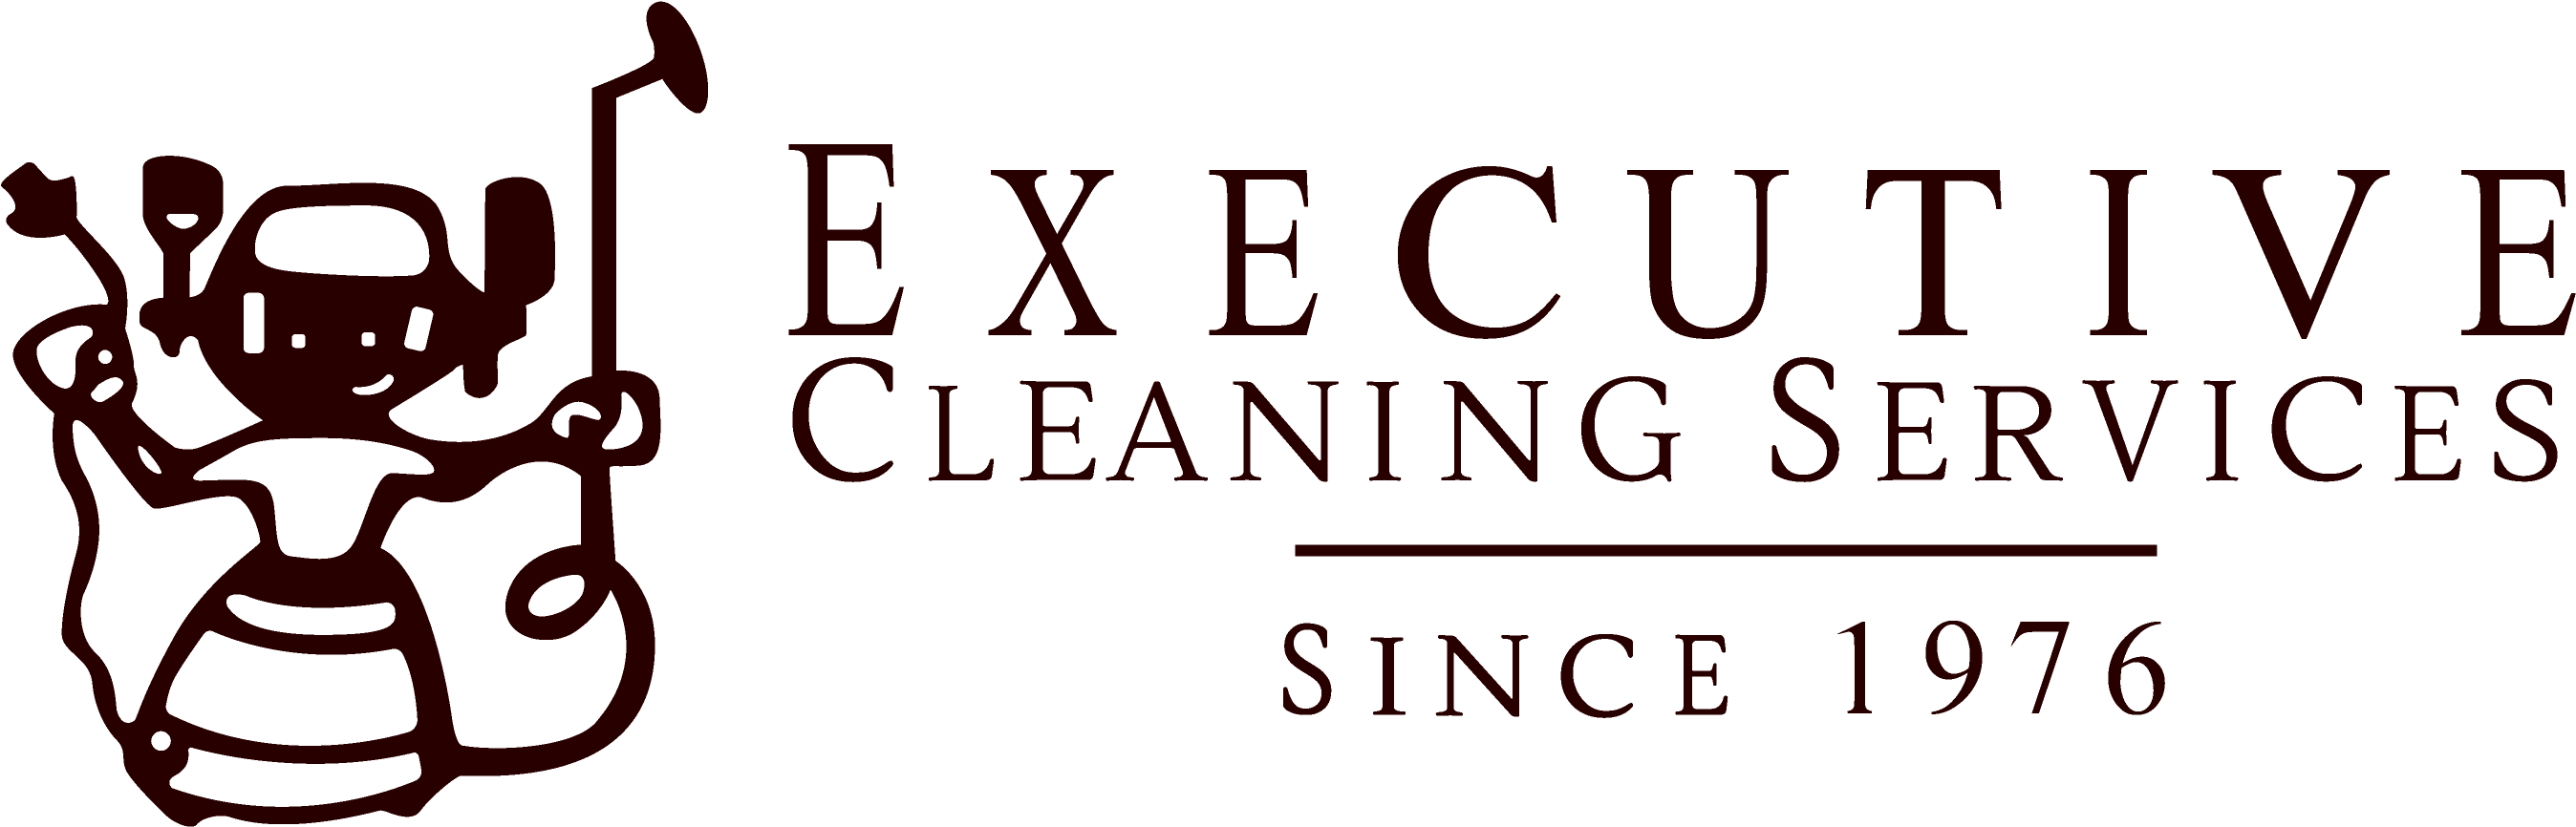 Executive Cleaning Services Logo PNG